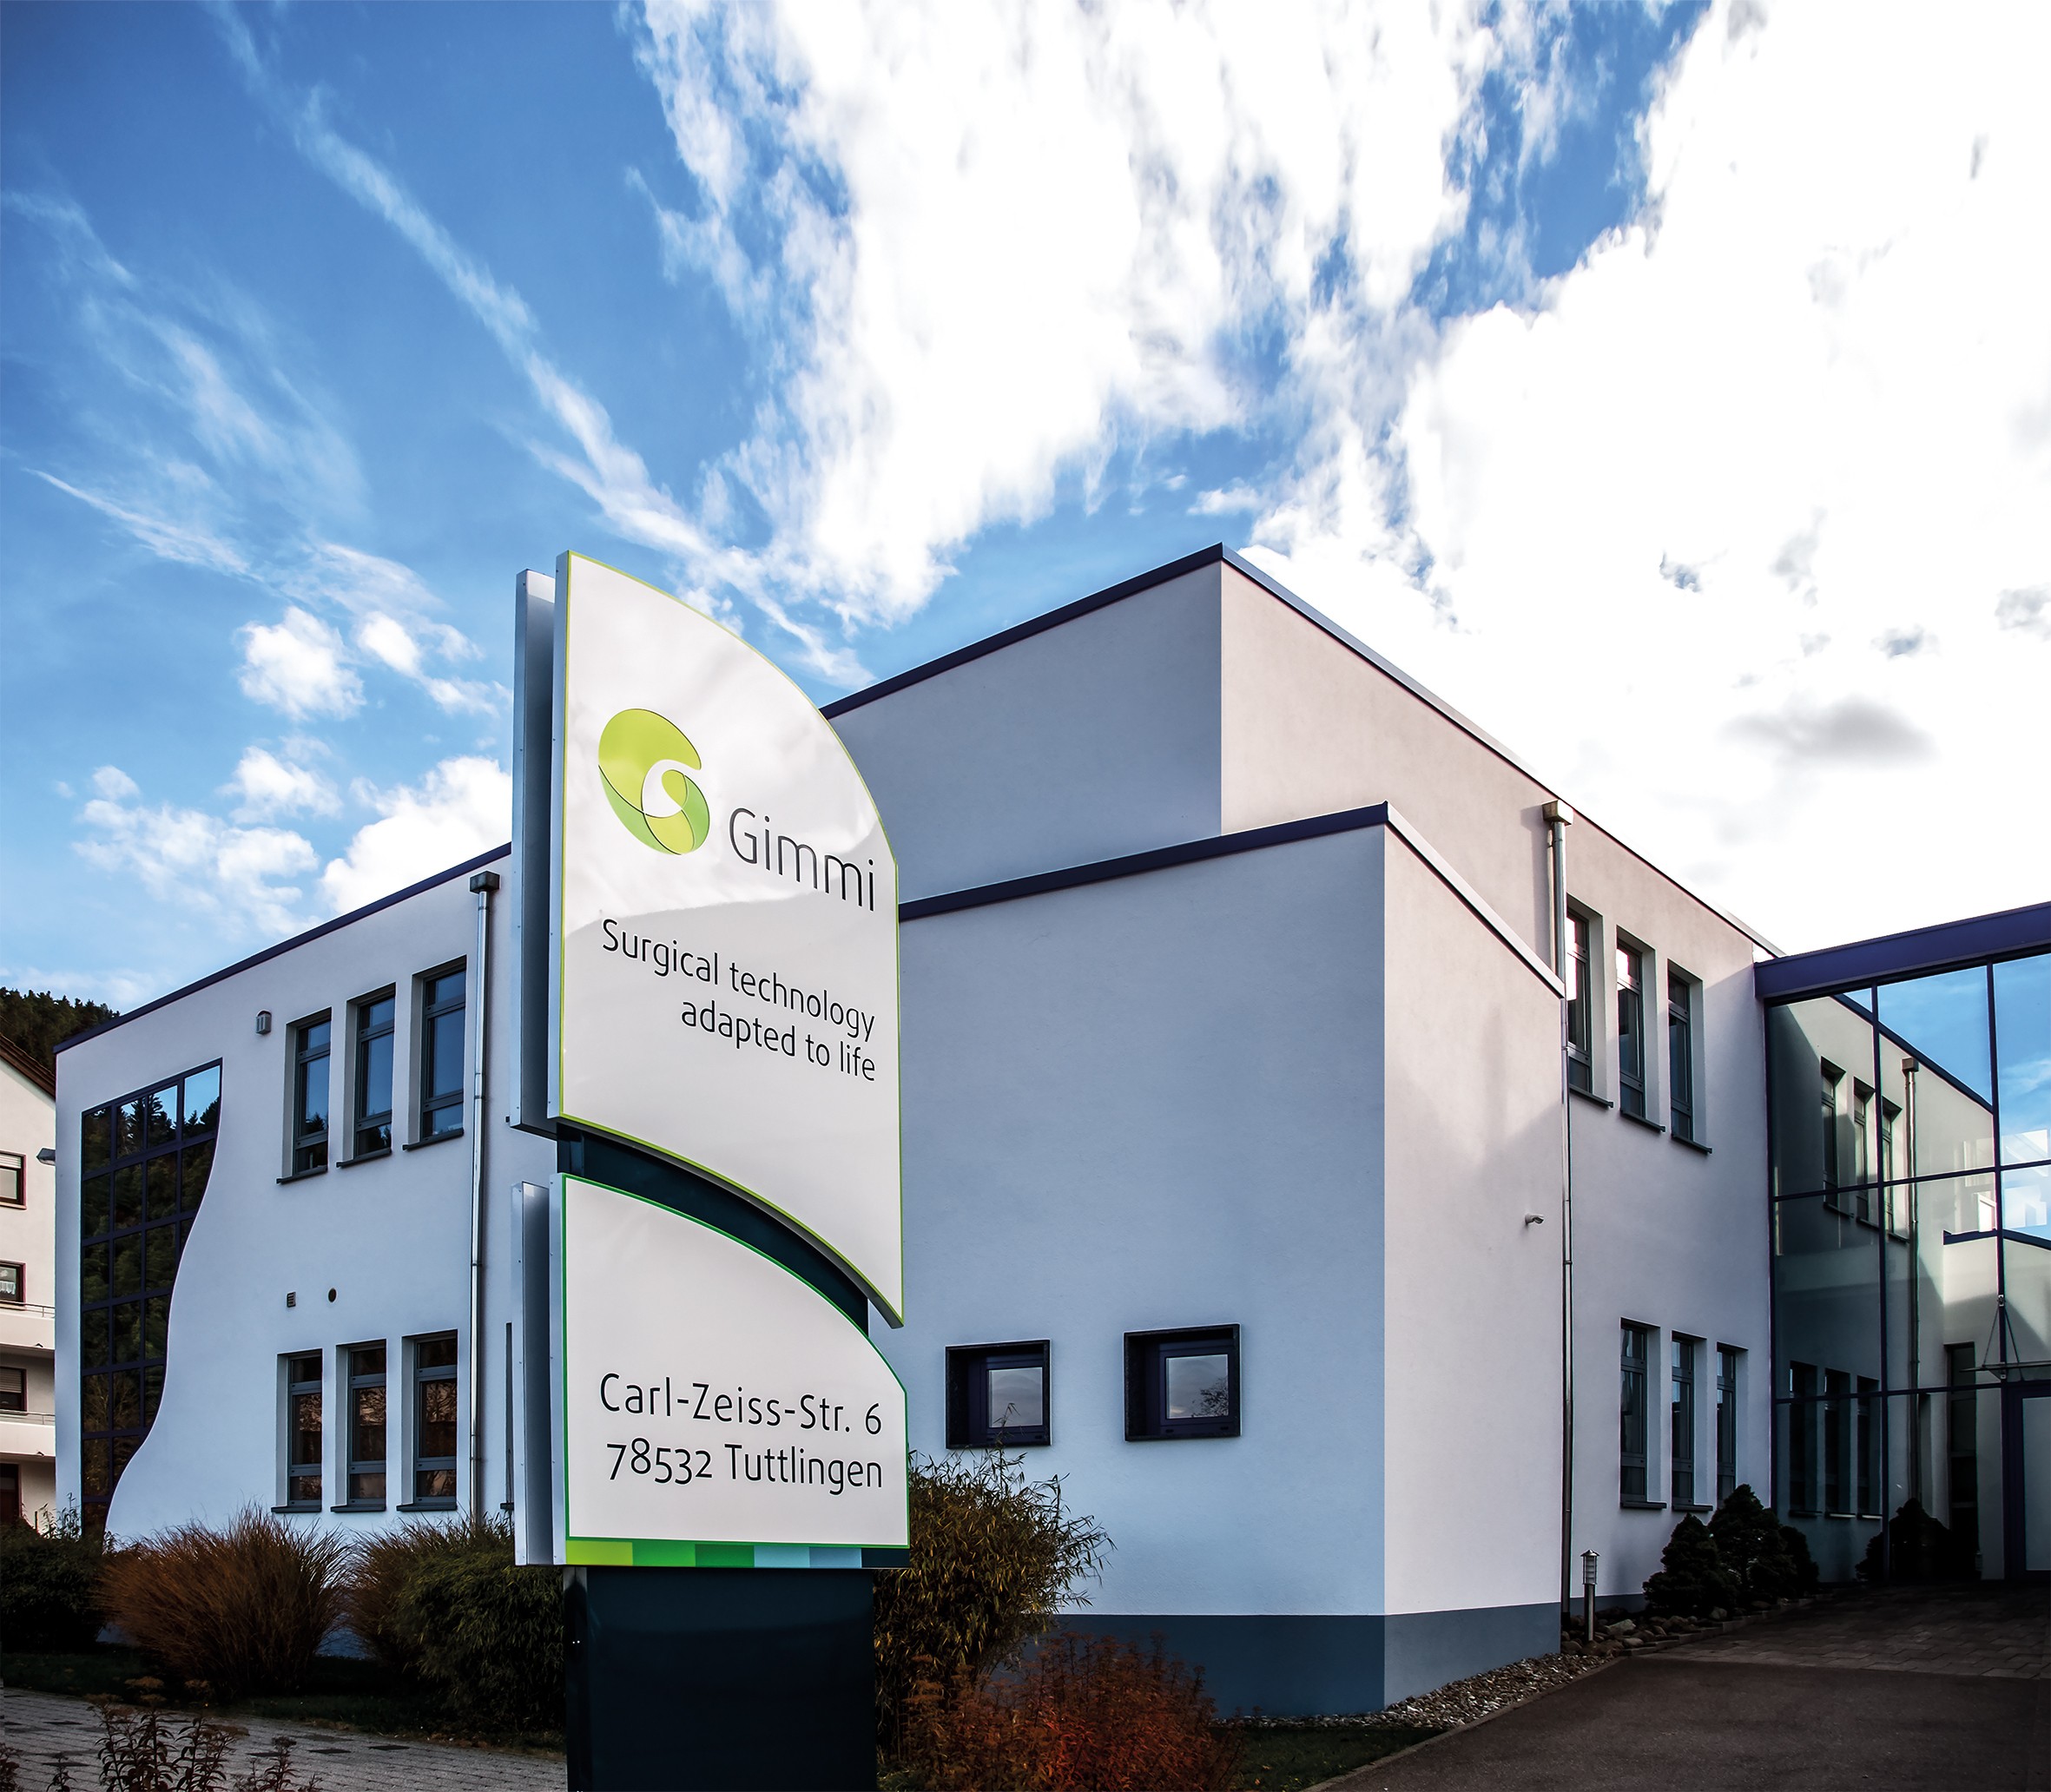 Gimmi coordinates global sales from its headquarters in Tuttlingen.